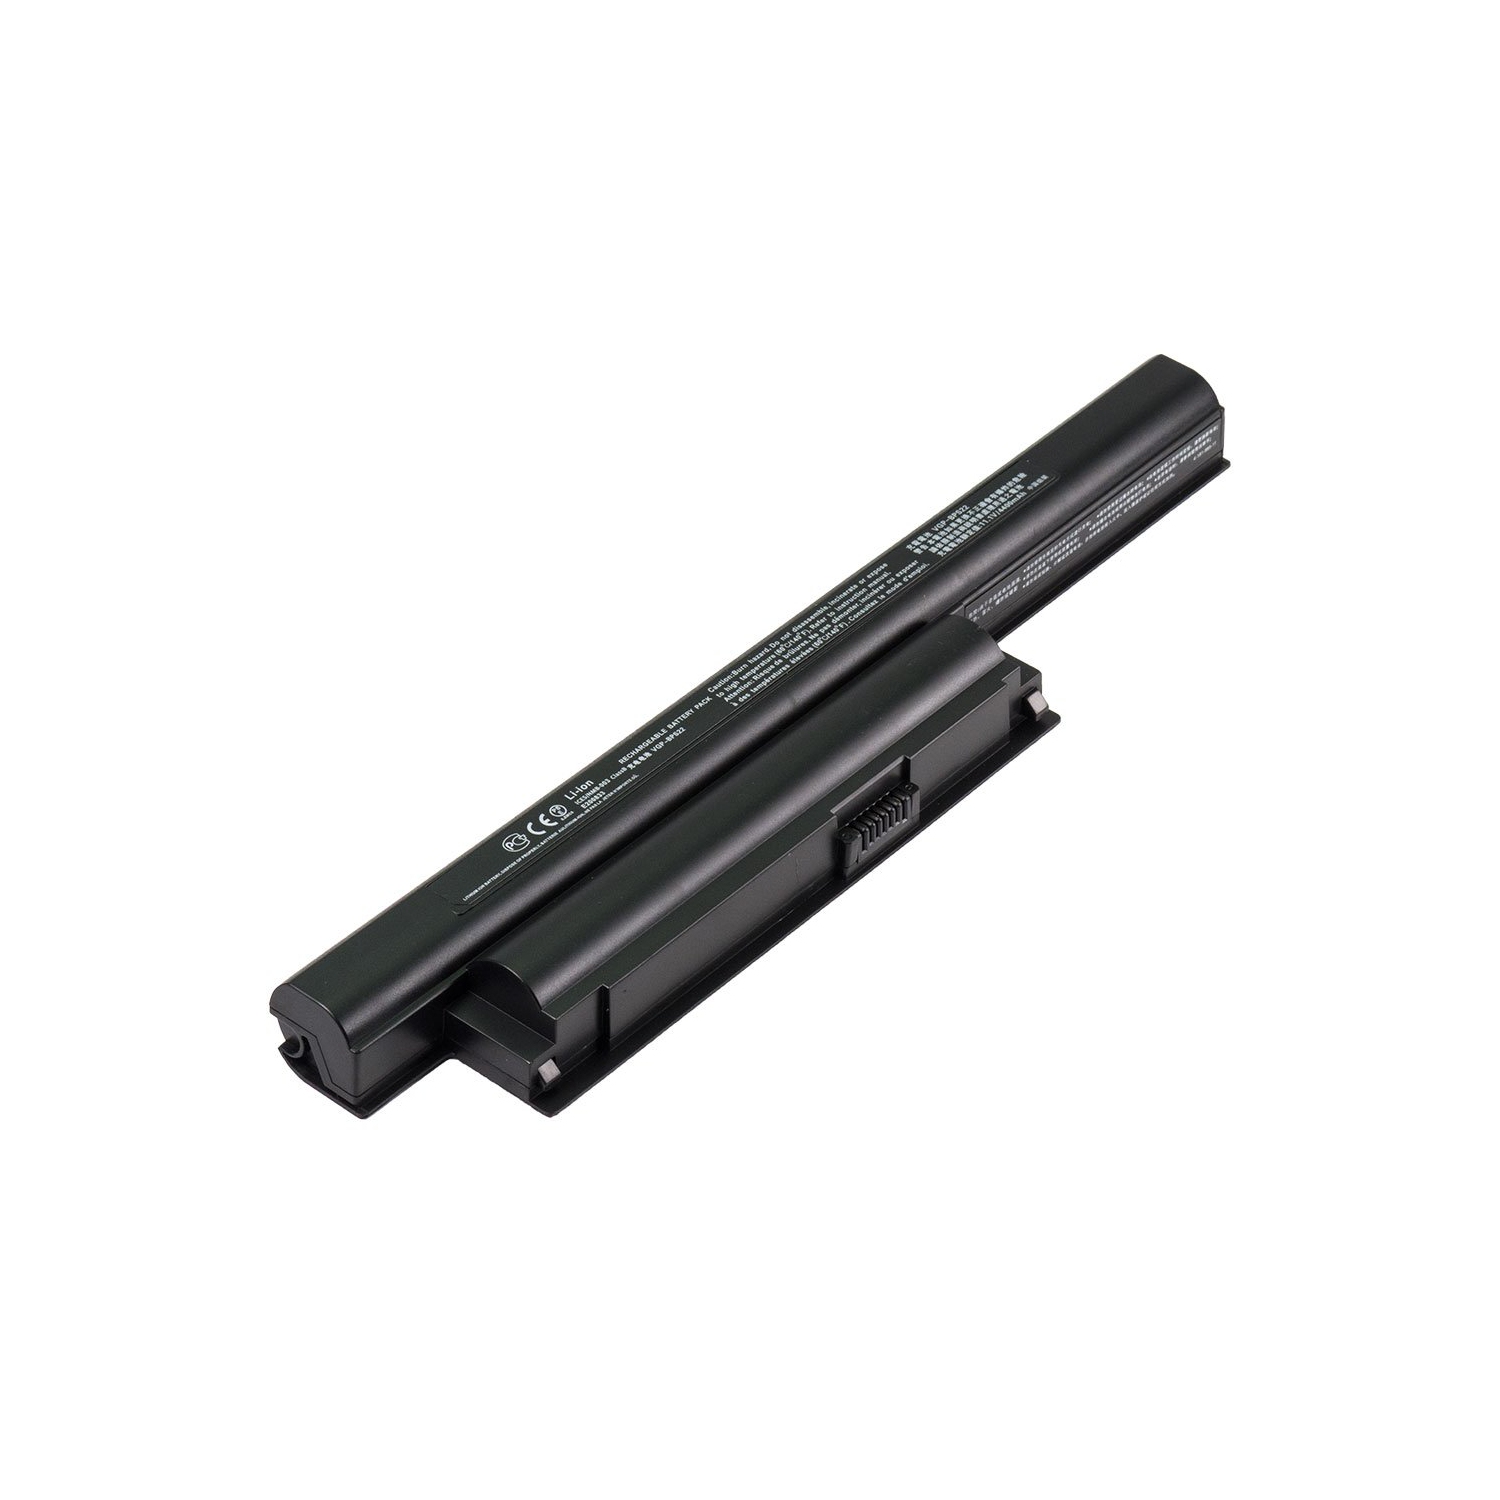 Laptop Battery Replacement for Sony VAIO VPC-EA3M1E/P, VGP-BPL22, VGP-BPS22, VGP-BPS22/A, VGP-BPS22A